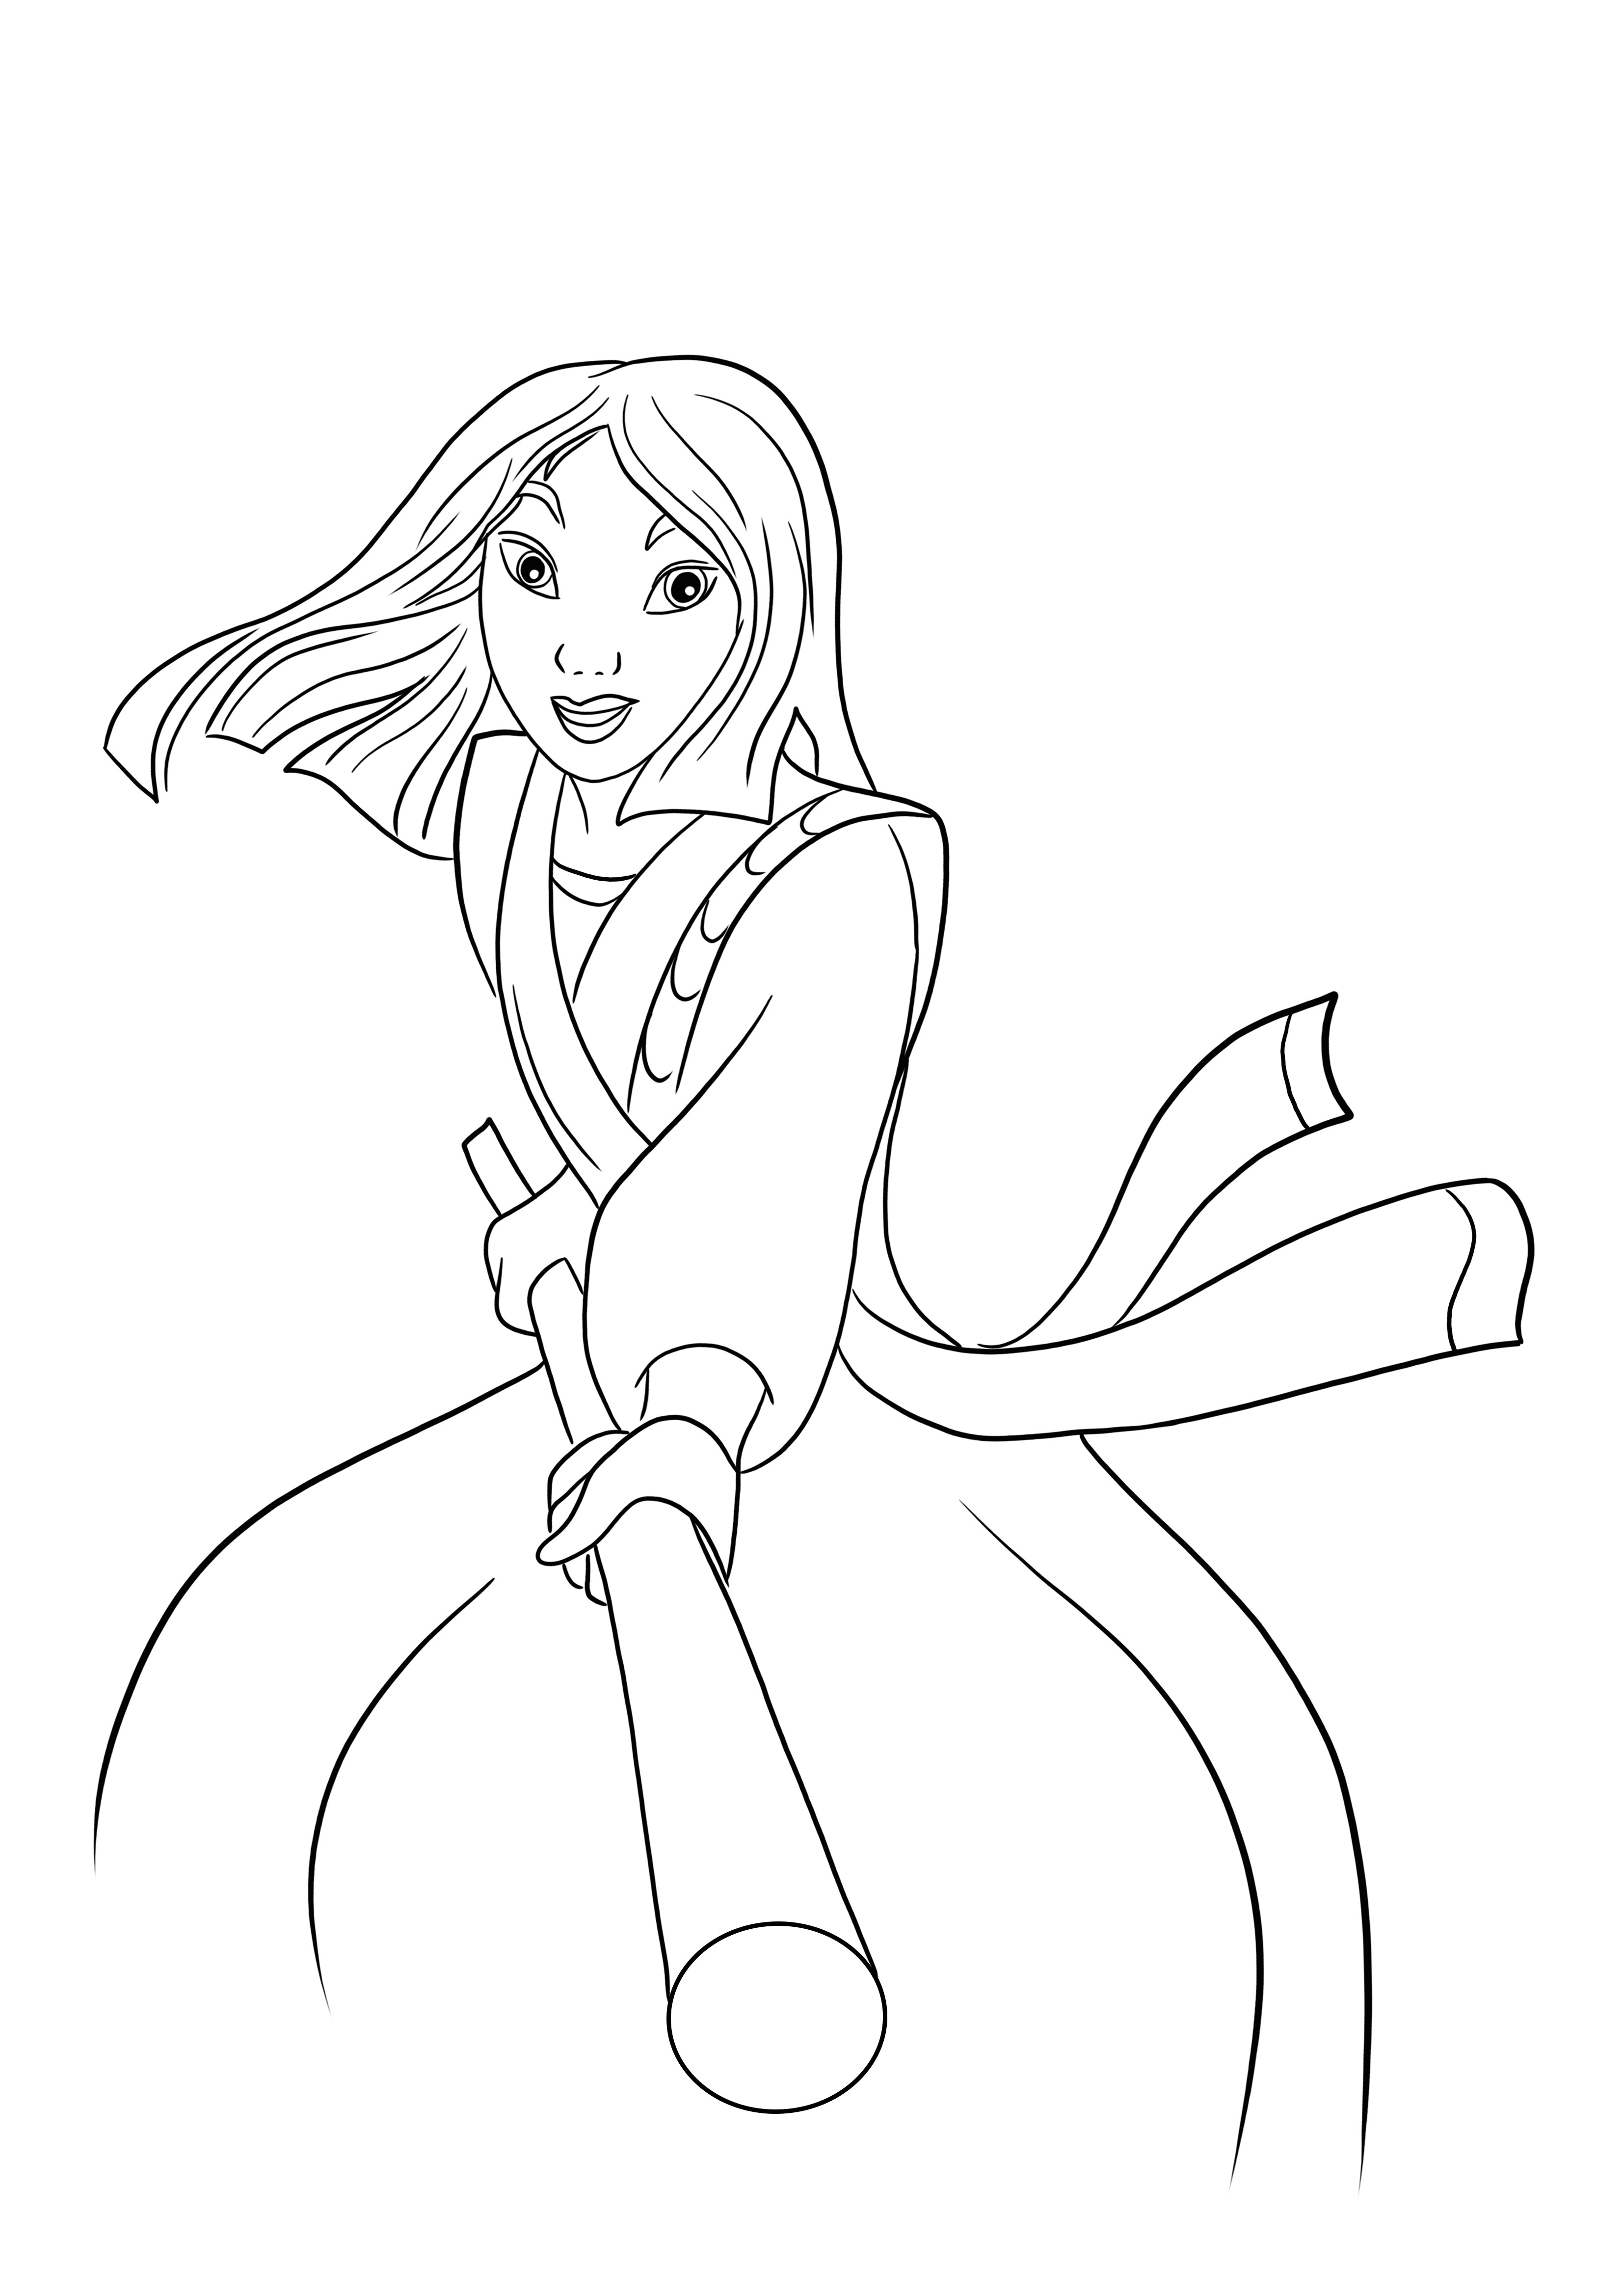 Here is a free downloading of Princess Mulan fighting picture to color easily